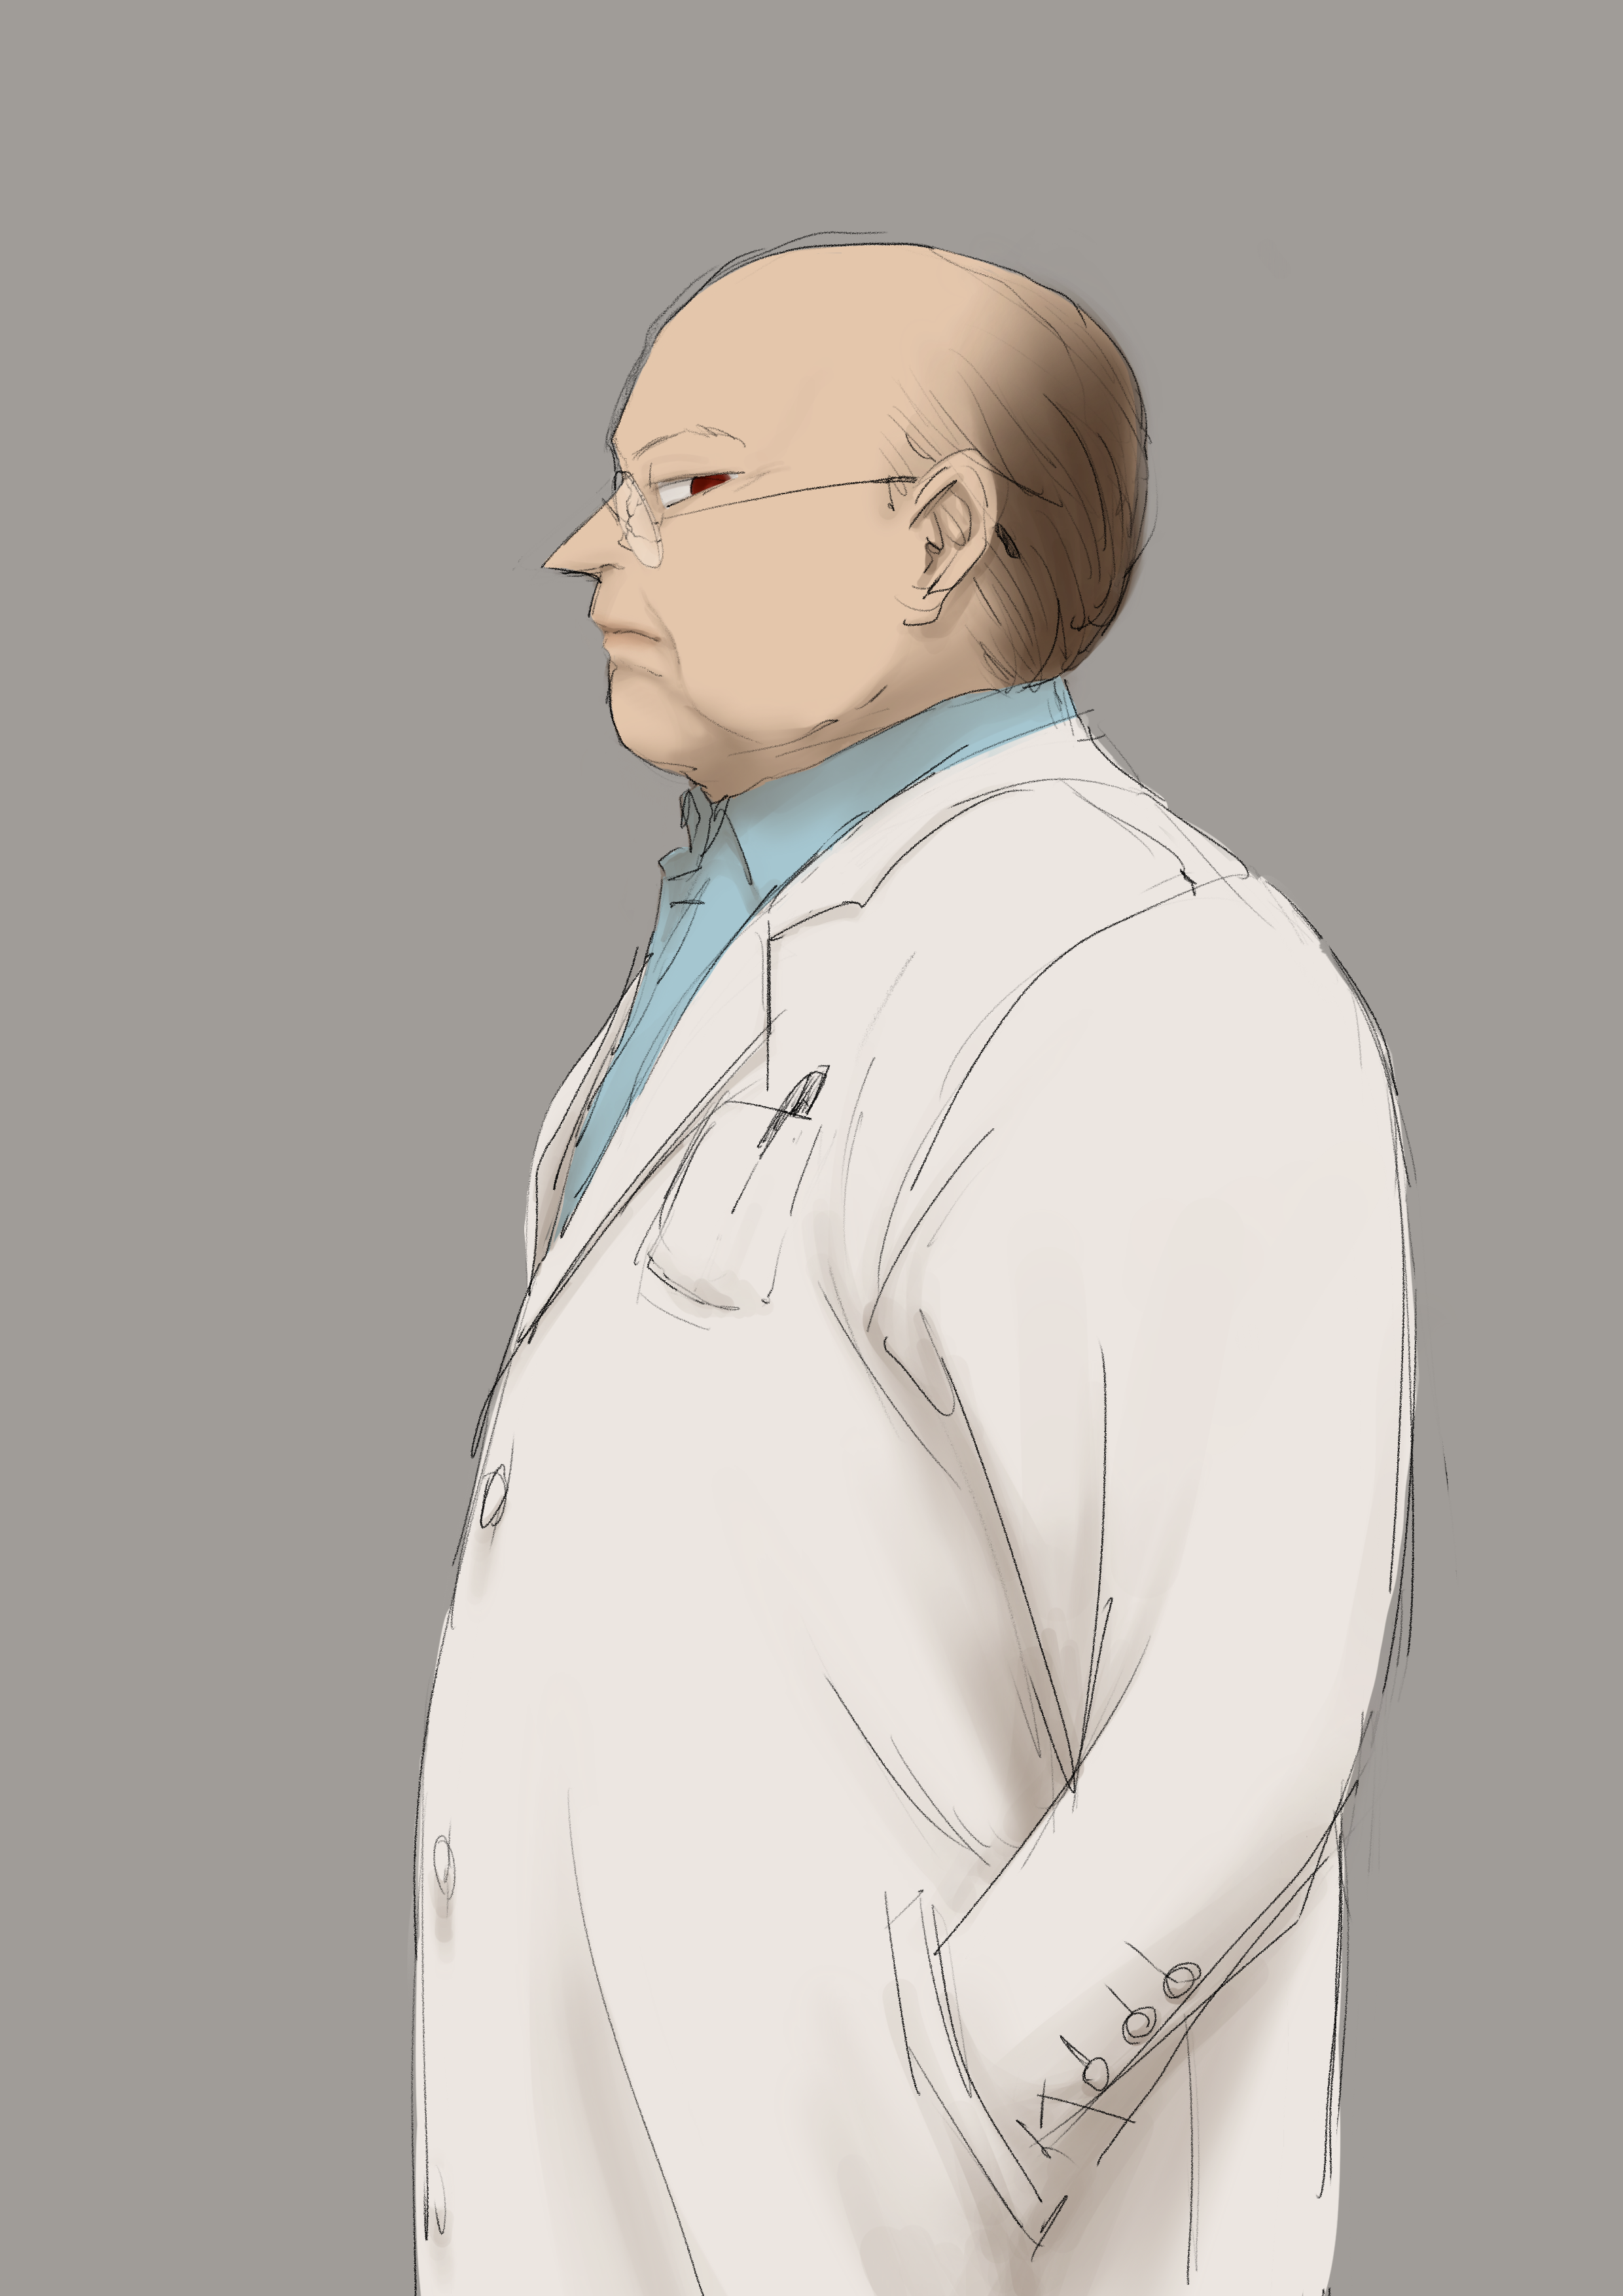 Dr. Robustiano